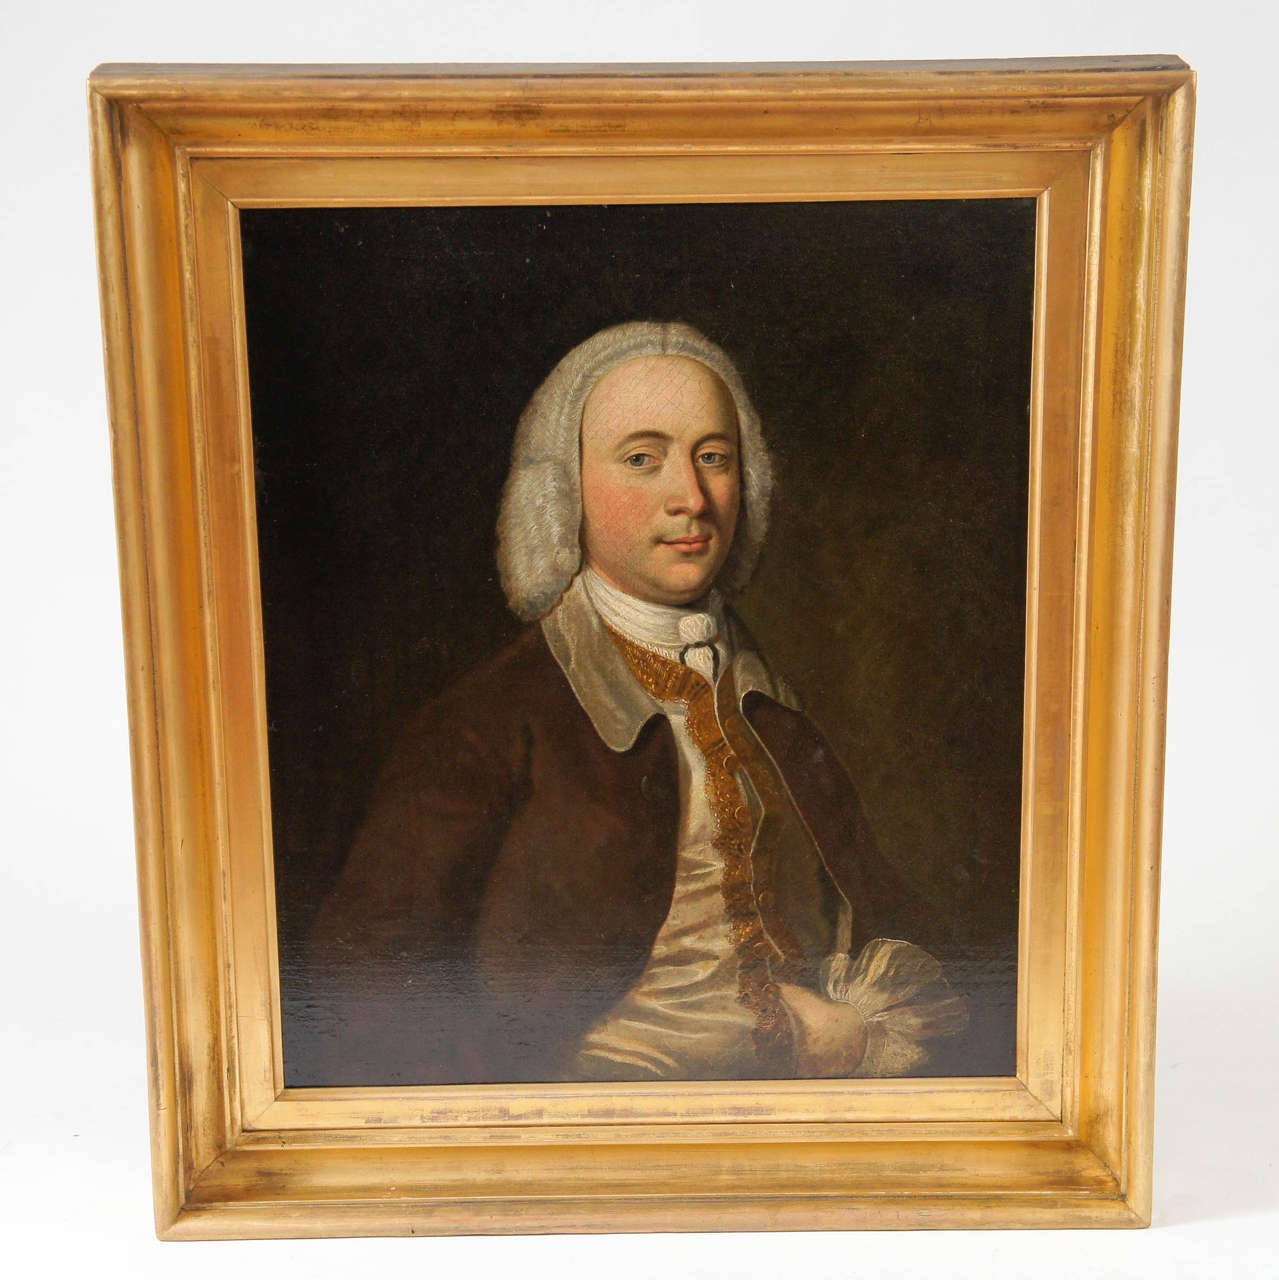 English George II period oil on canvas of a gentleman exhibiting exceptional technical skills of detail and form. Unsigned. Fine mid-19th-century ogee-moulded giltwood frame with original finish. Canvas measures 30.25